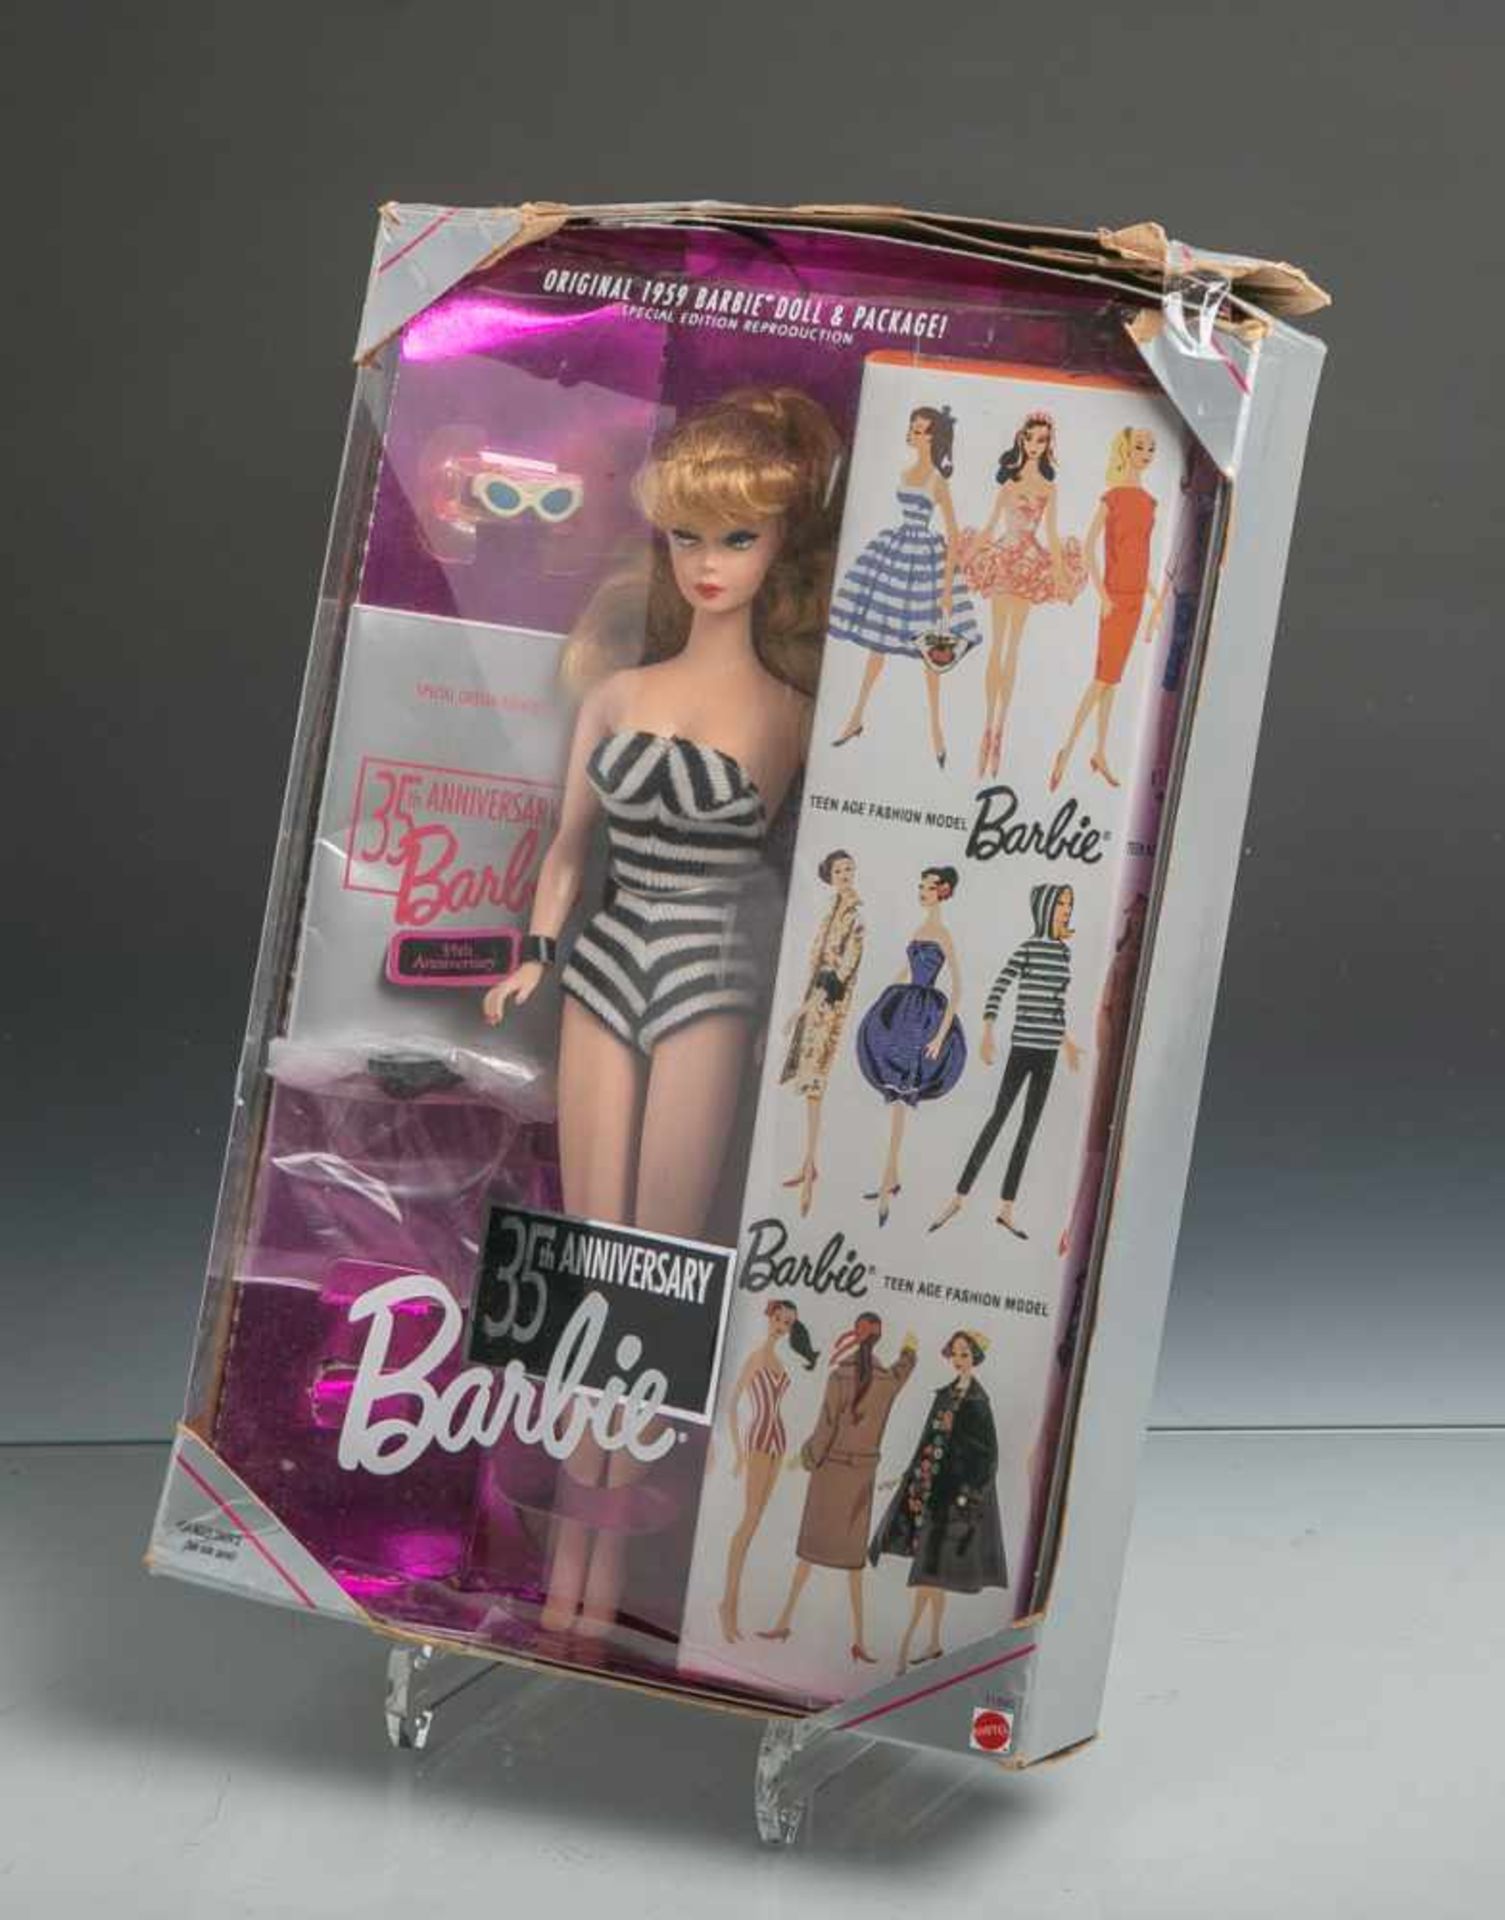 Barbie-Puppe "35th Anniversary" (Mattel, 1993), Special Edition Reproduction, Modellnr.11590,